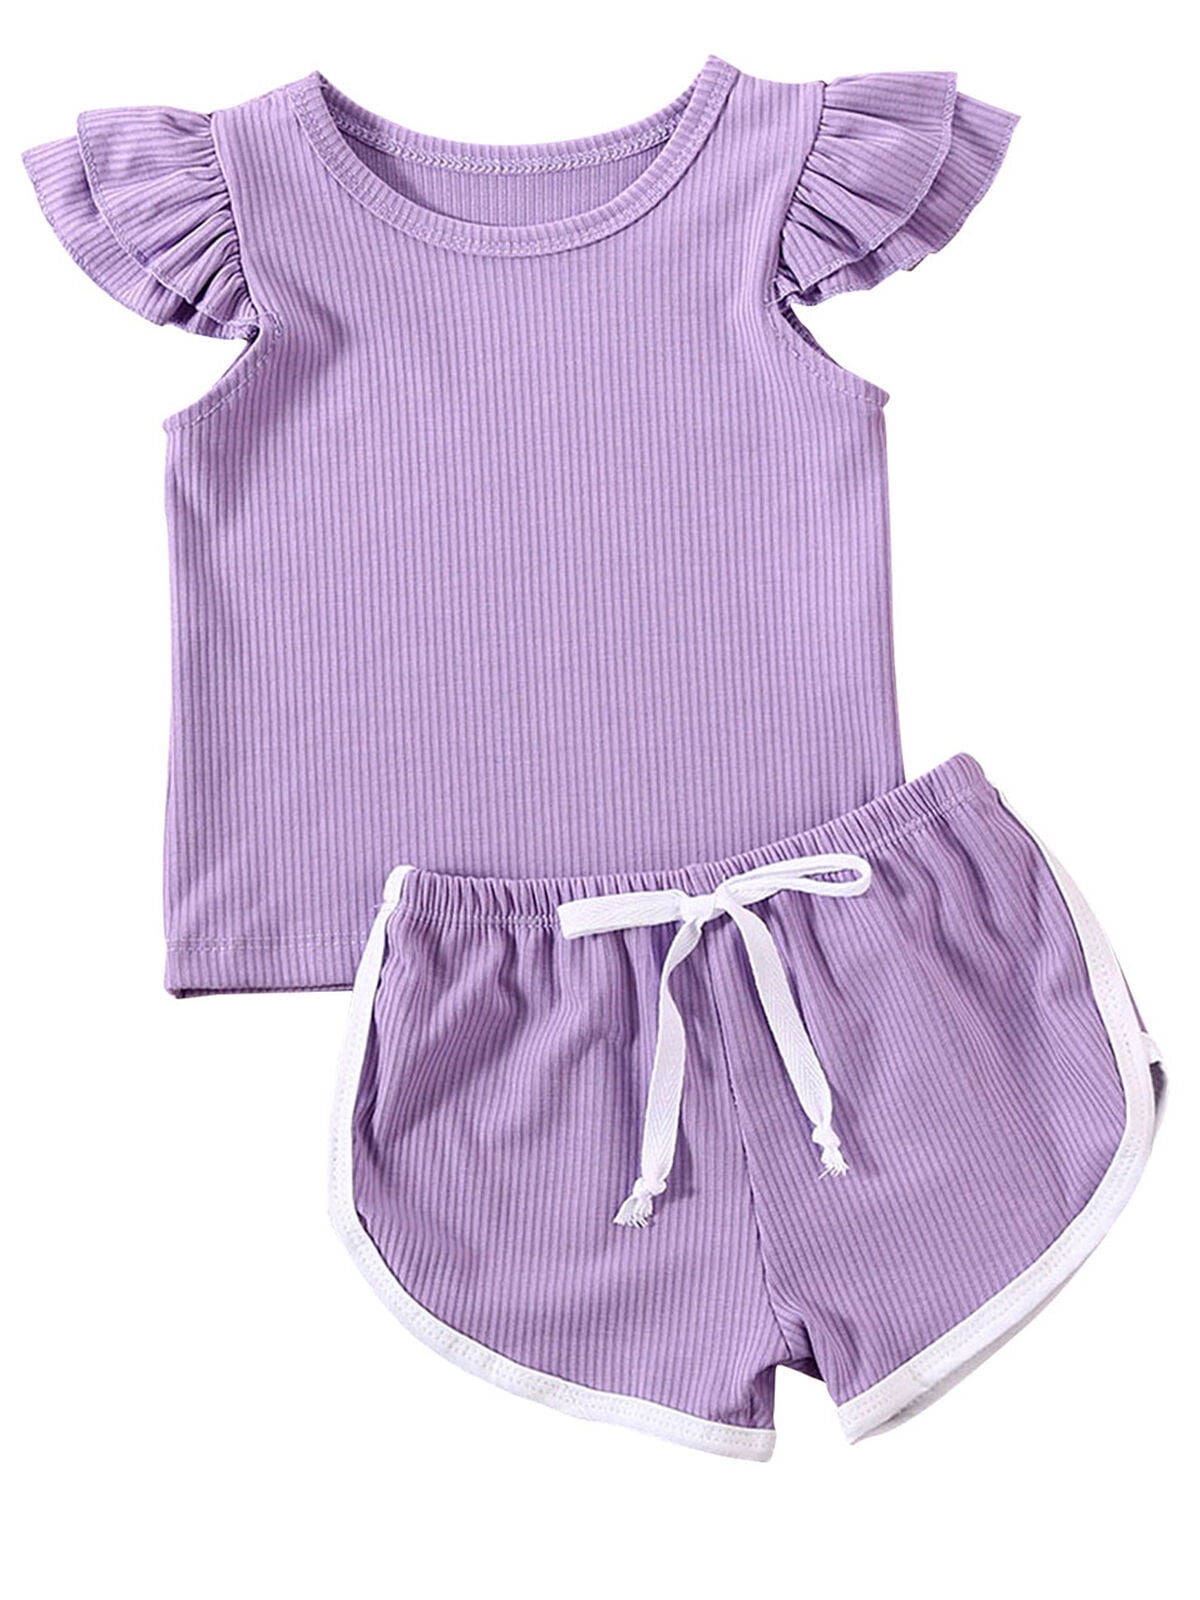 IGEMY Summer Kids Baby Girls Outfits Clothes T-shirt Tops+Short Pants Shorts Set